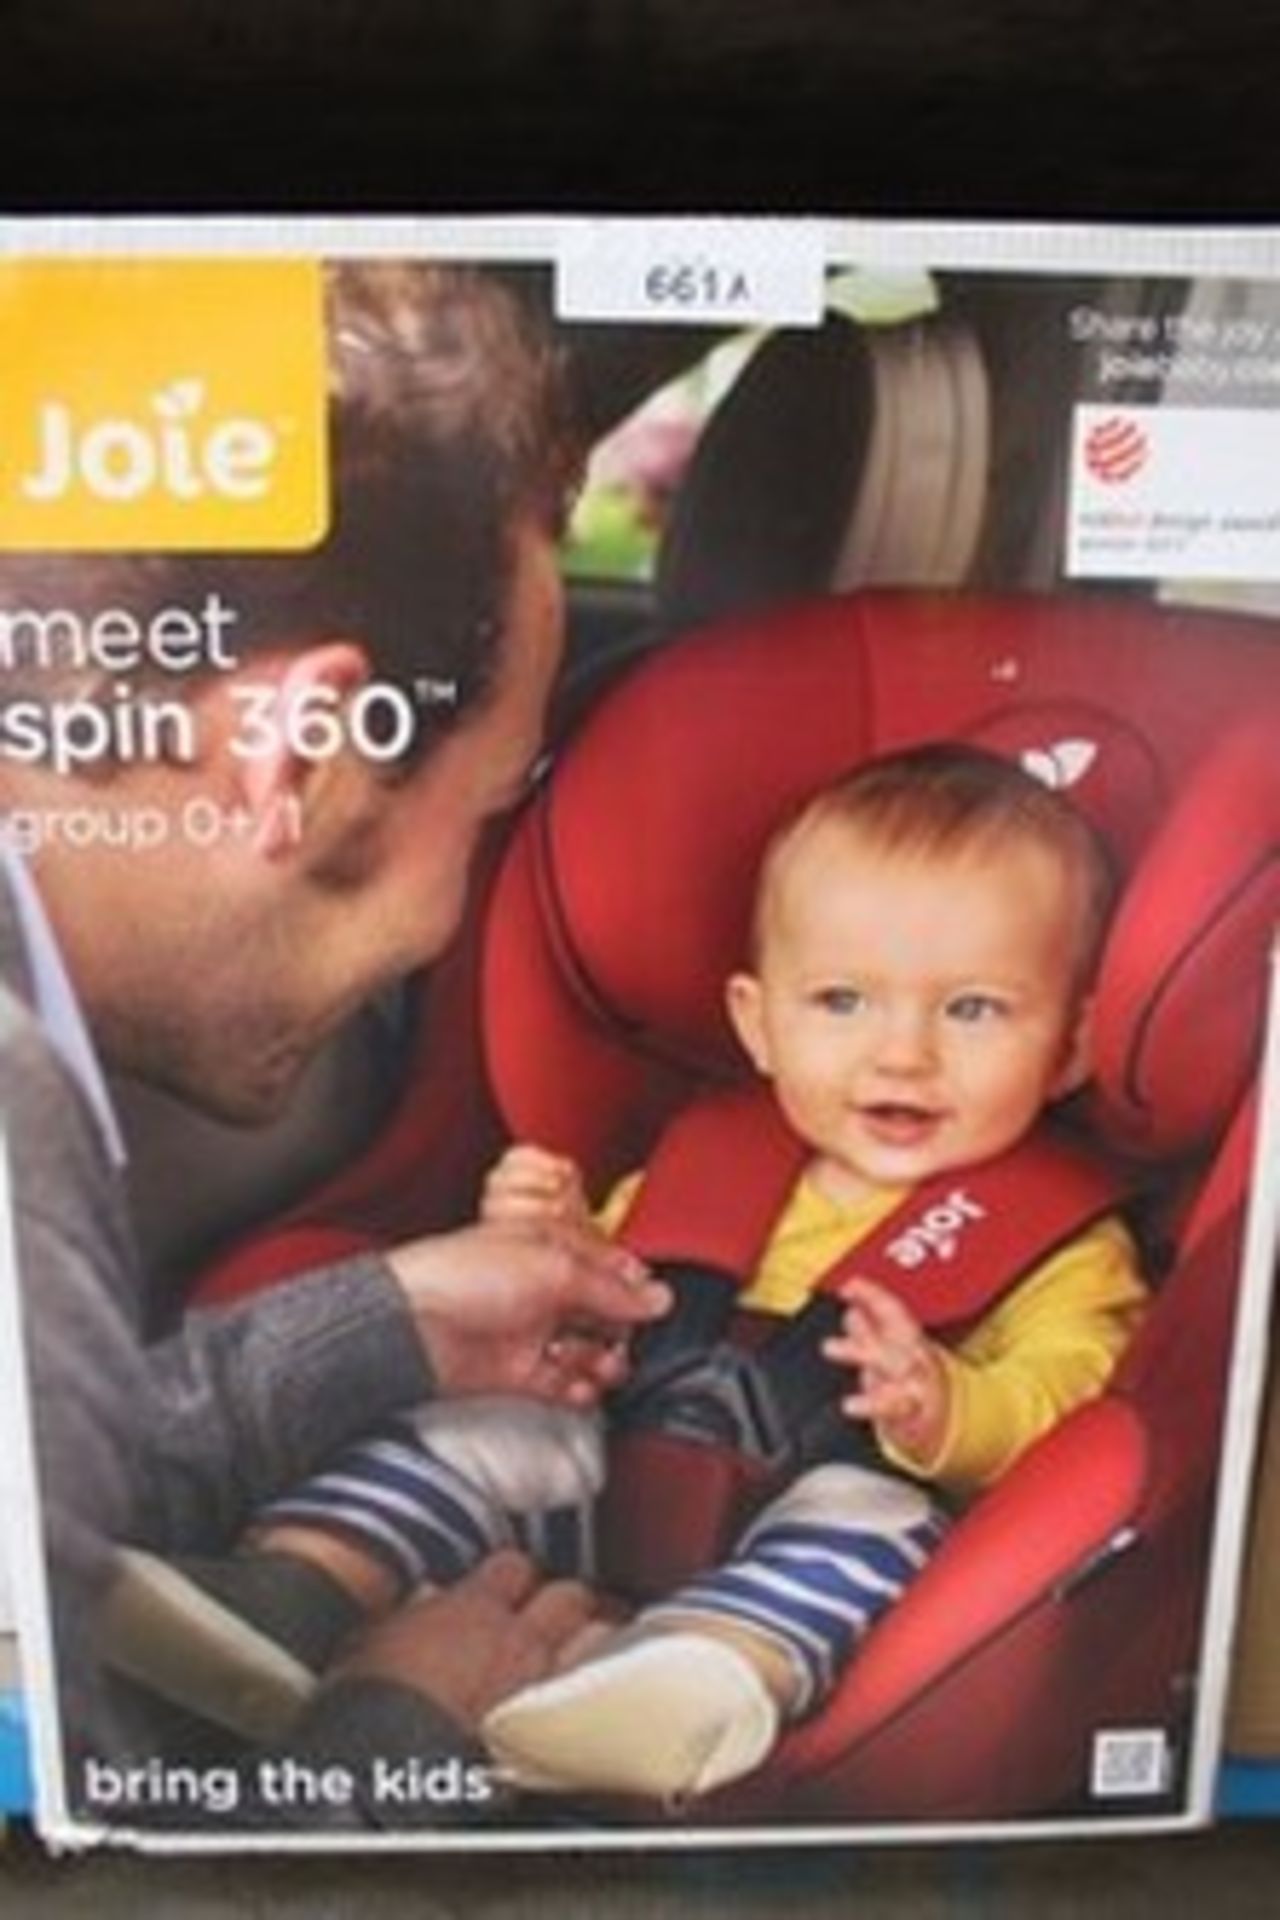 1 x Joie say hello to spin 360 Ember car seat - Sealed new in box (GS31)